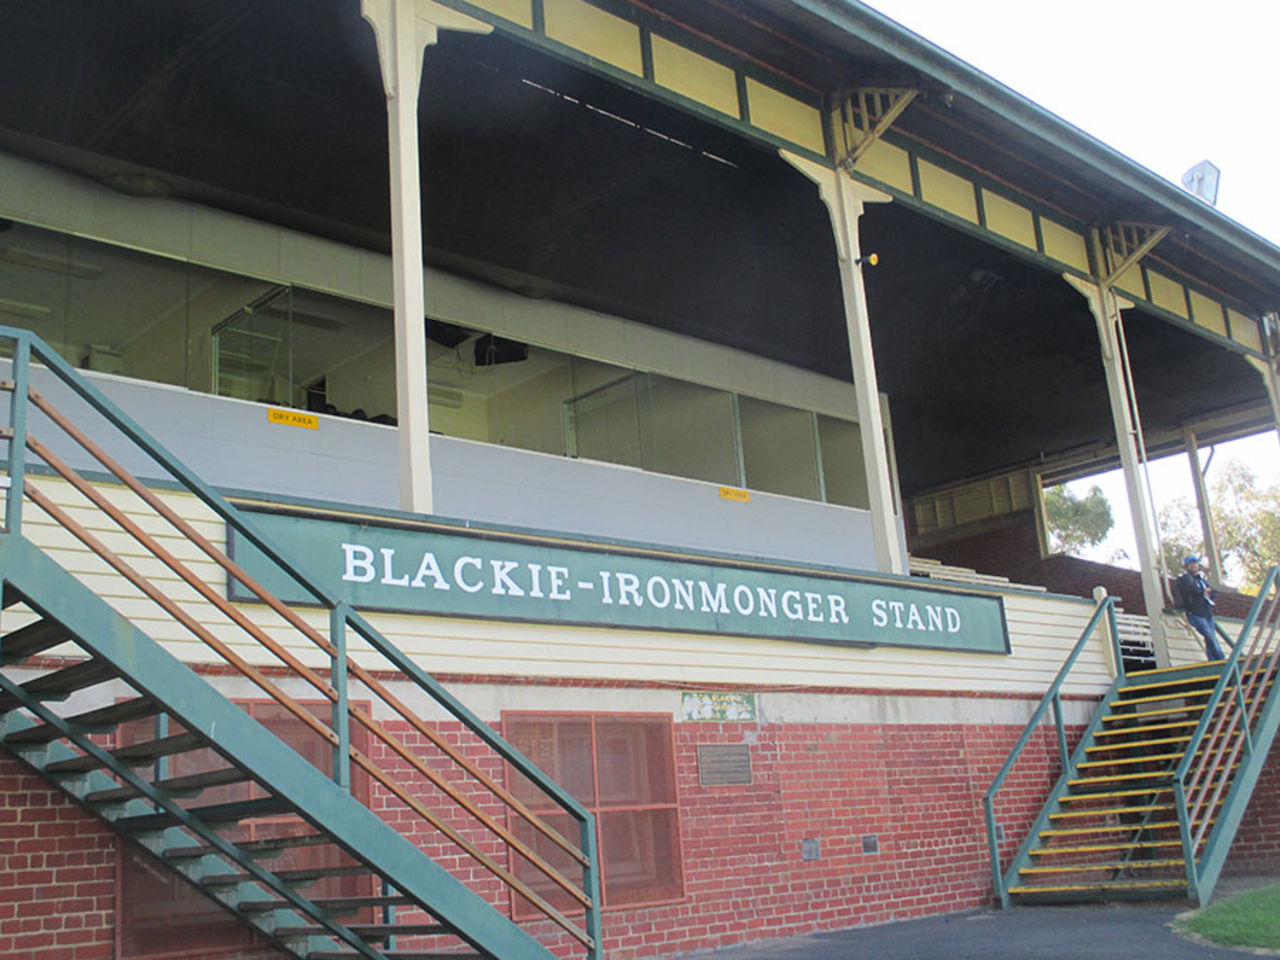 The old grandstand at Junction Oval, St Kilda, February 20, 2015